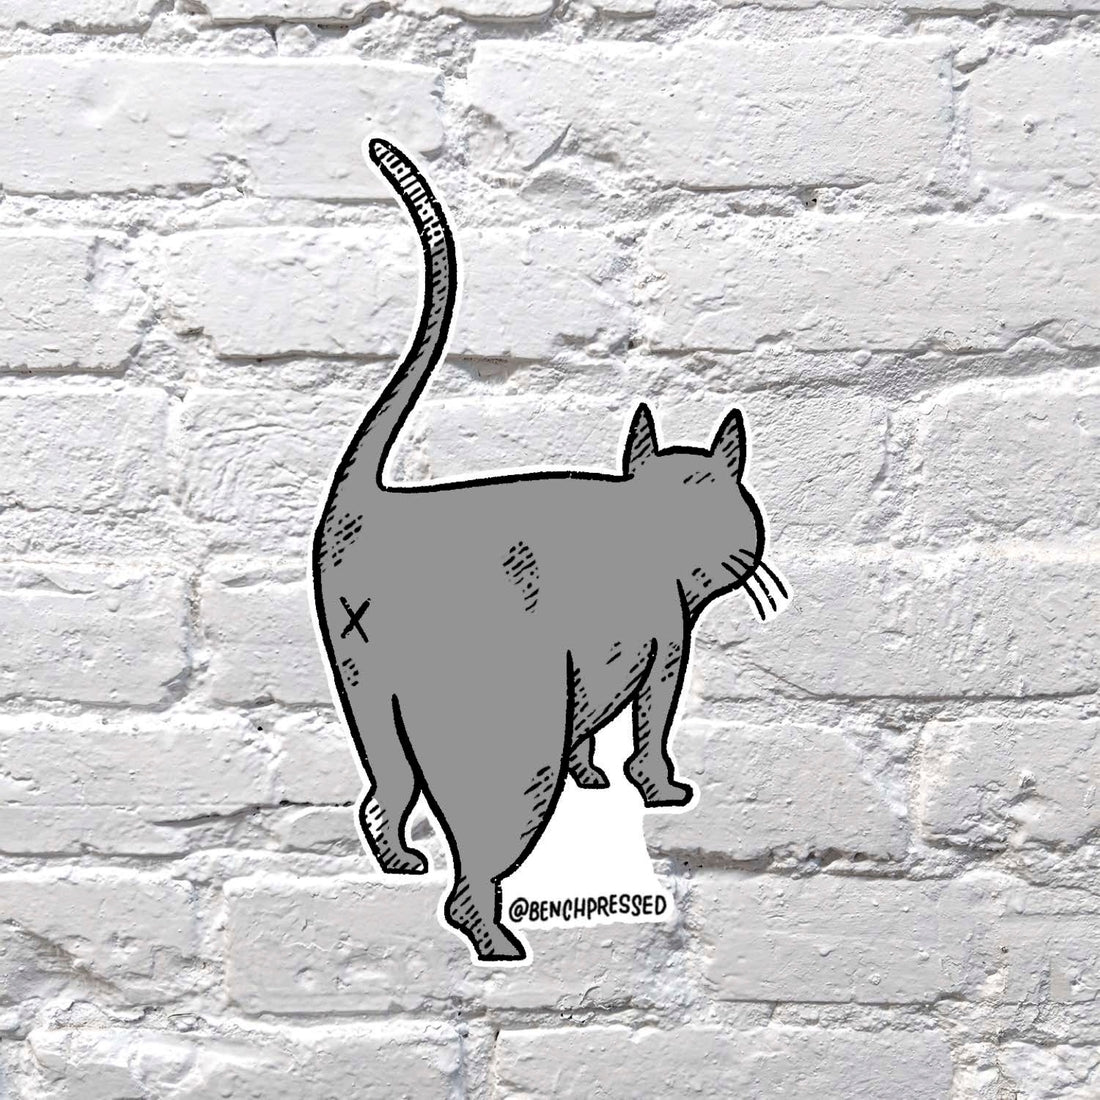 Image of a grey cat from the back showing its butthole.         